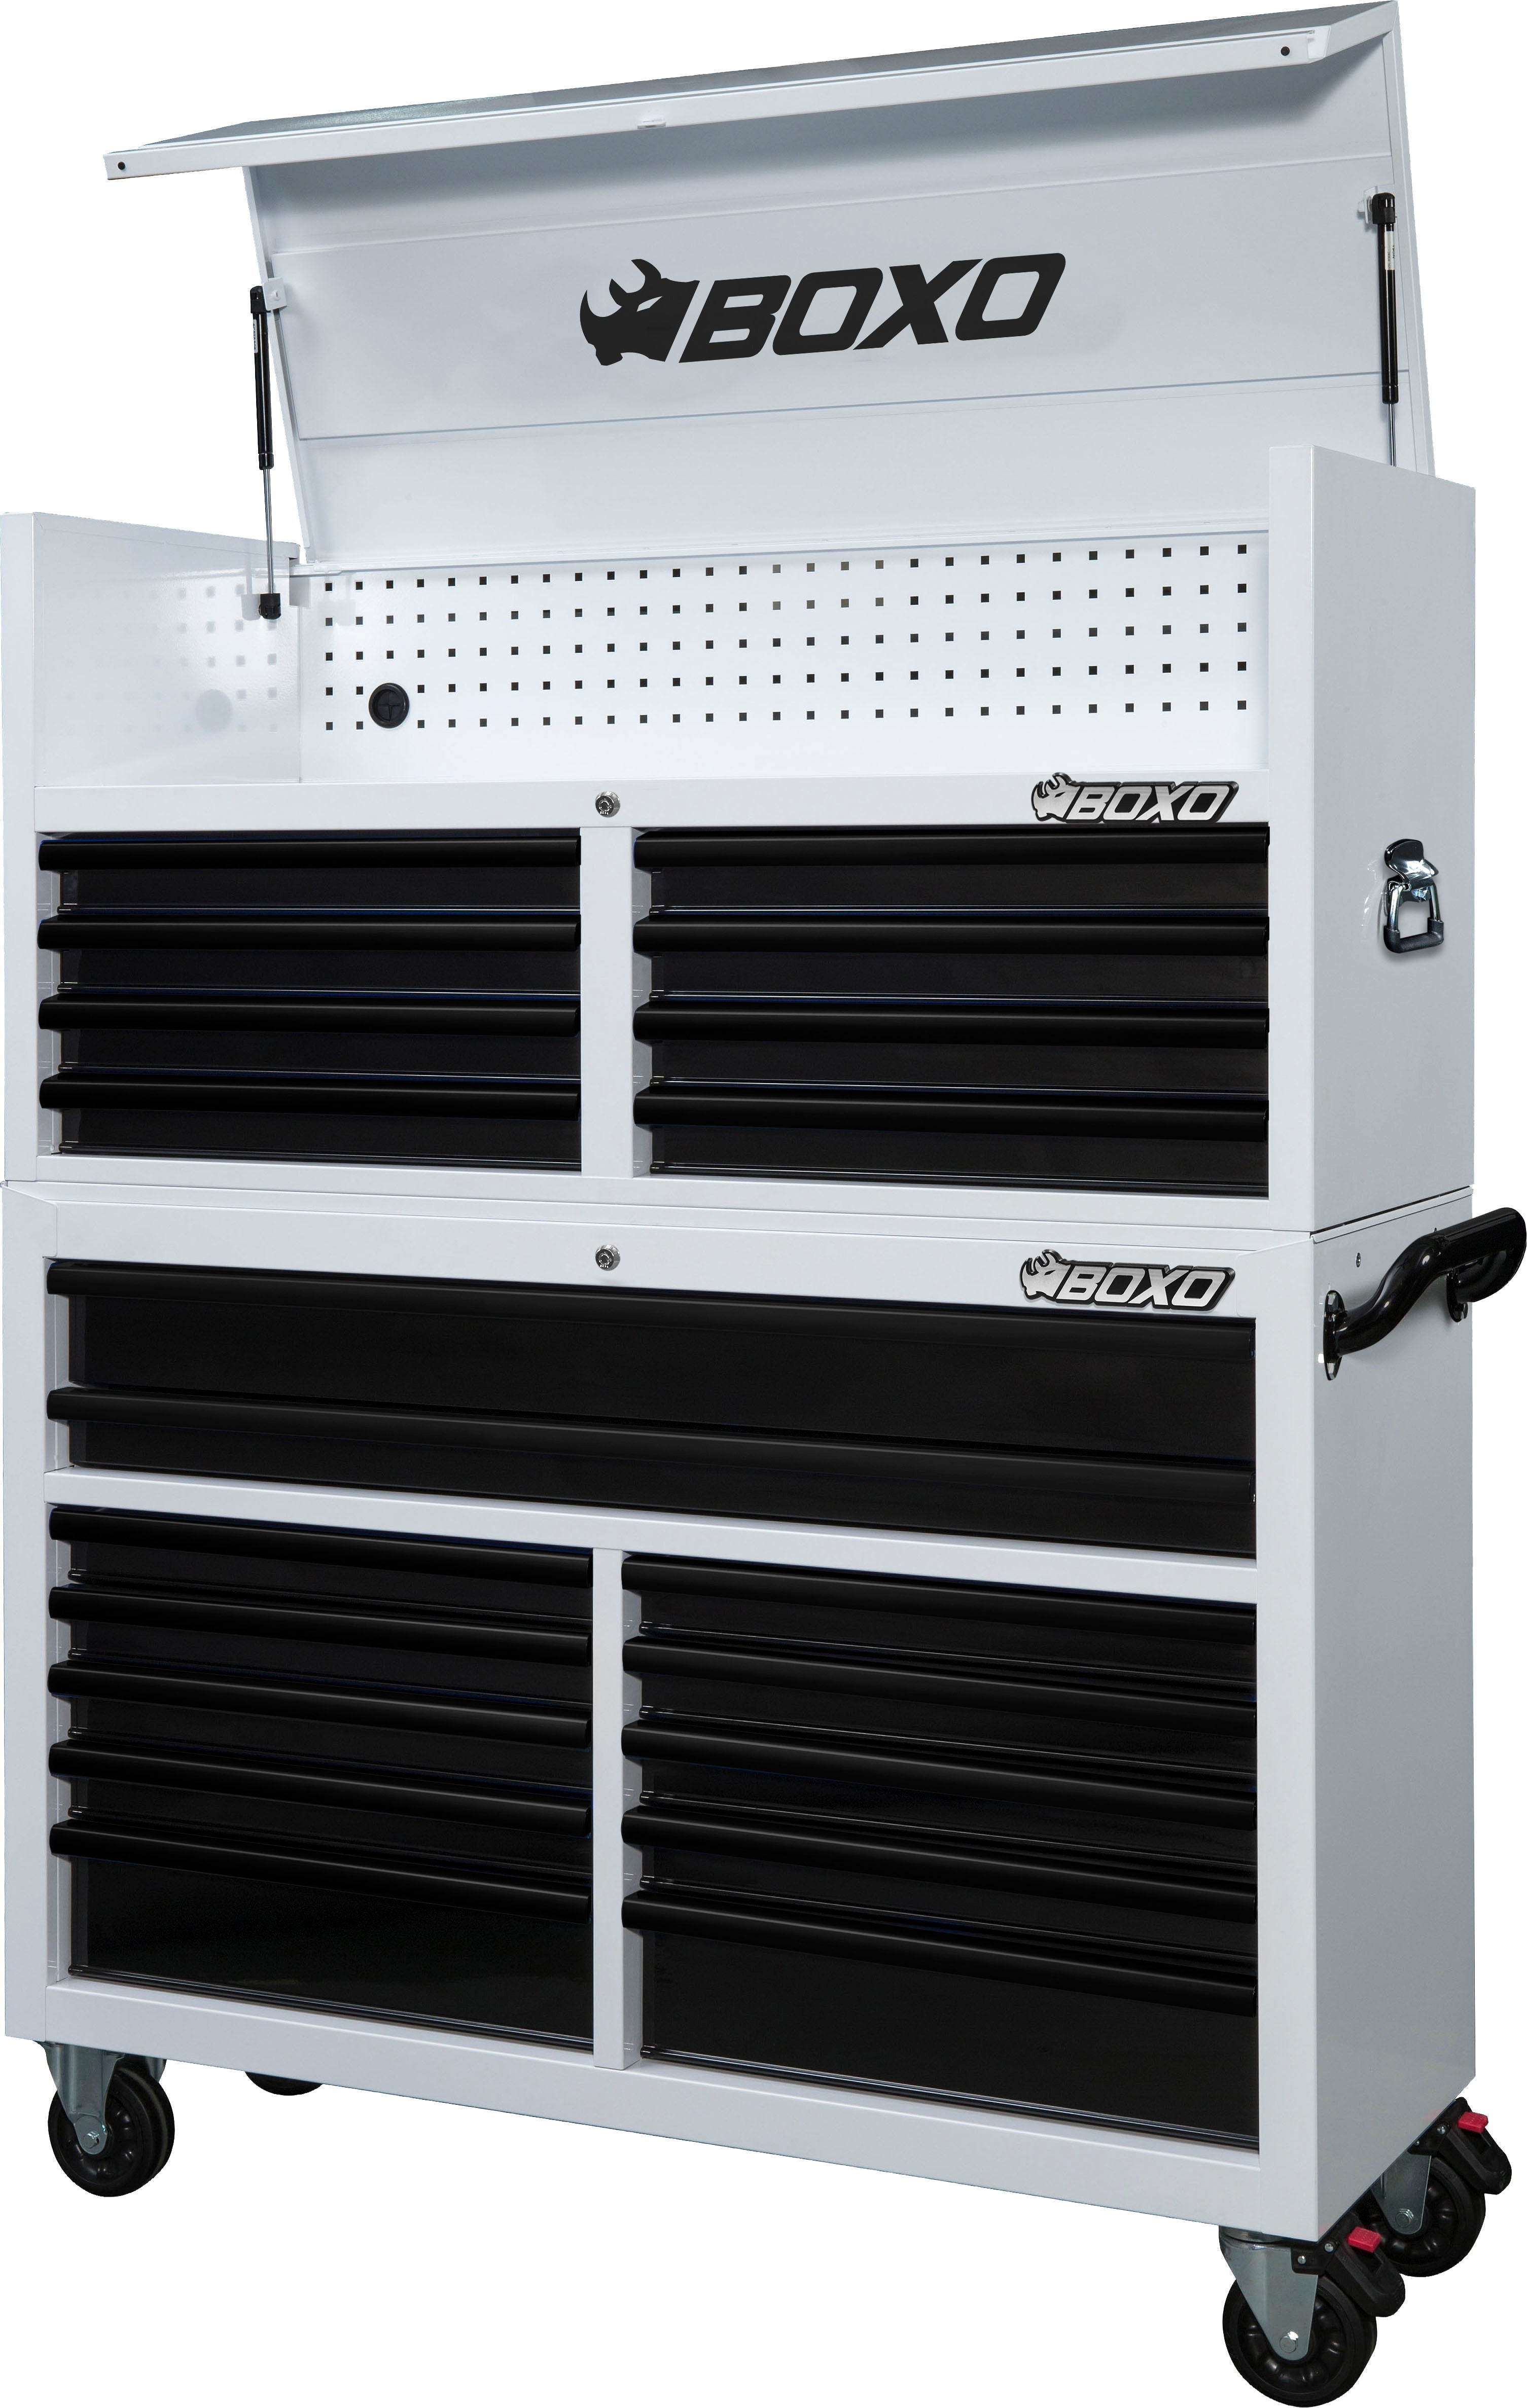 BOXO 53" 20 Drawer Toolbox Stack with Drawer Trim Pack - White Body with Trim Colour Options